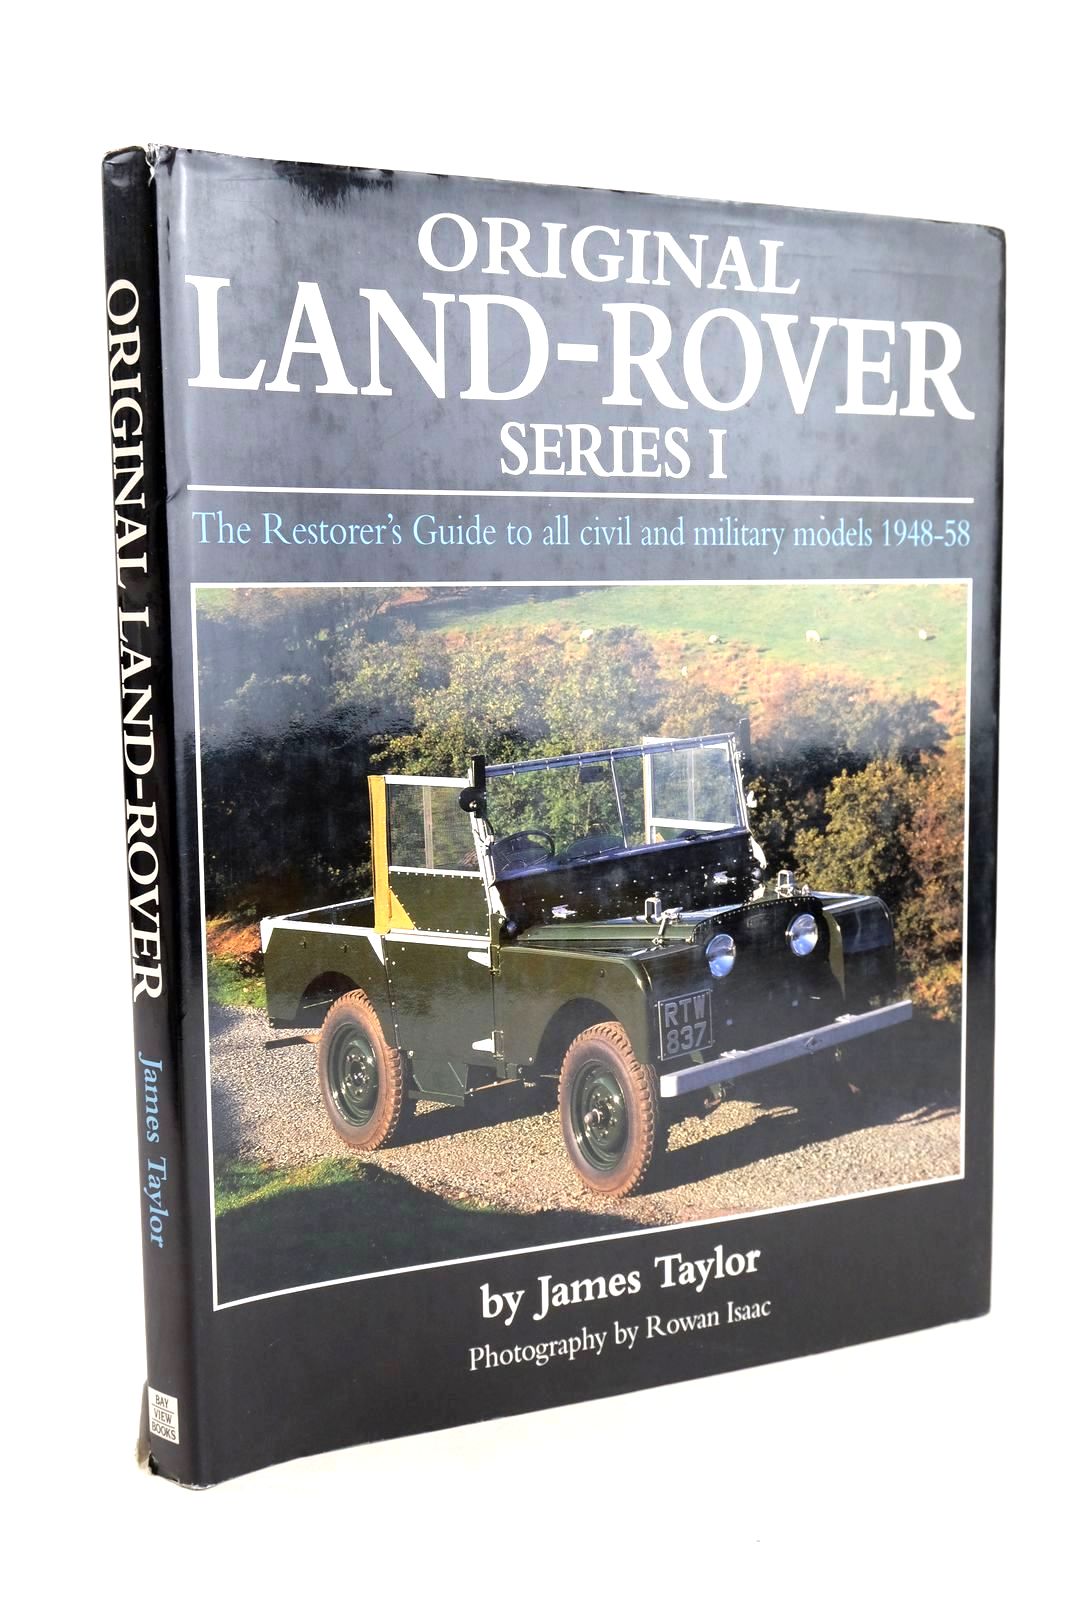 Photo of ORIGINAL LAND-ROVER SERIES I written by Taylor, James illustrated by Isaac, Rowan published by Bay View Books (STOCK CODE: 1327634)  for sale by Stella & Rose's Books